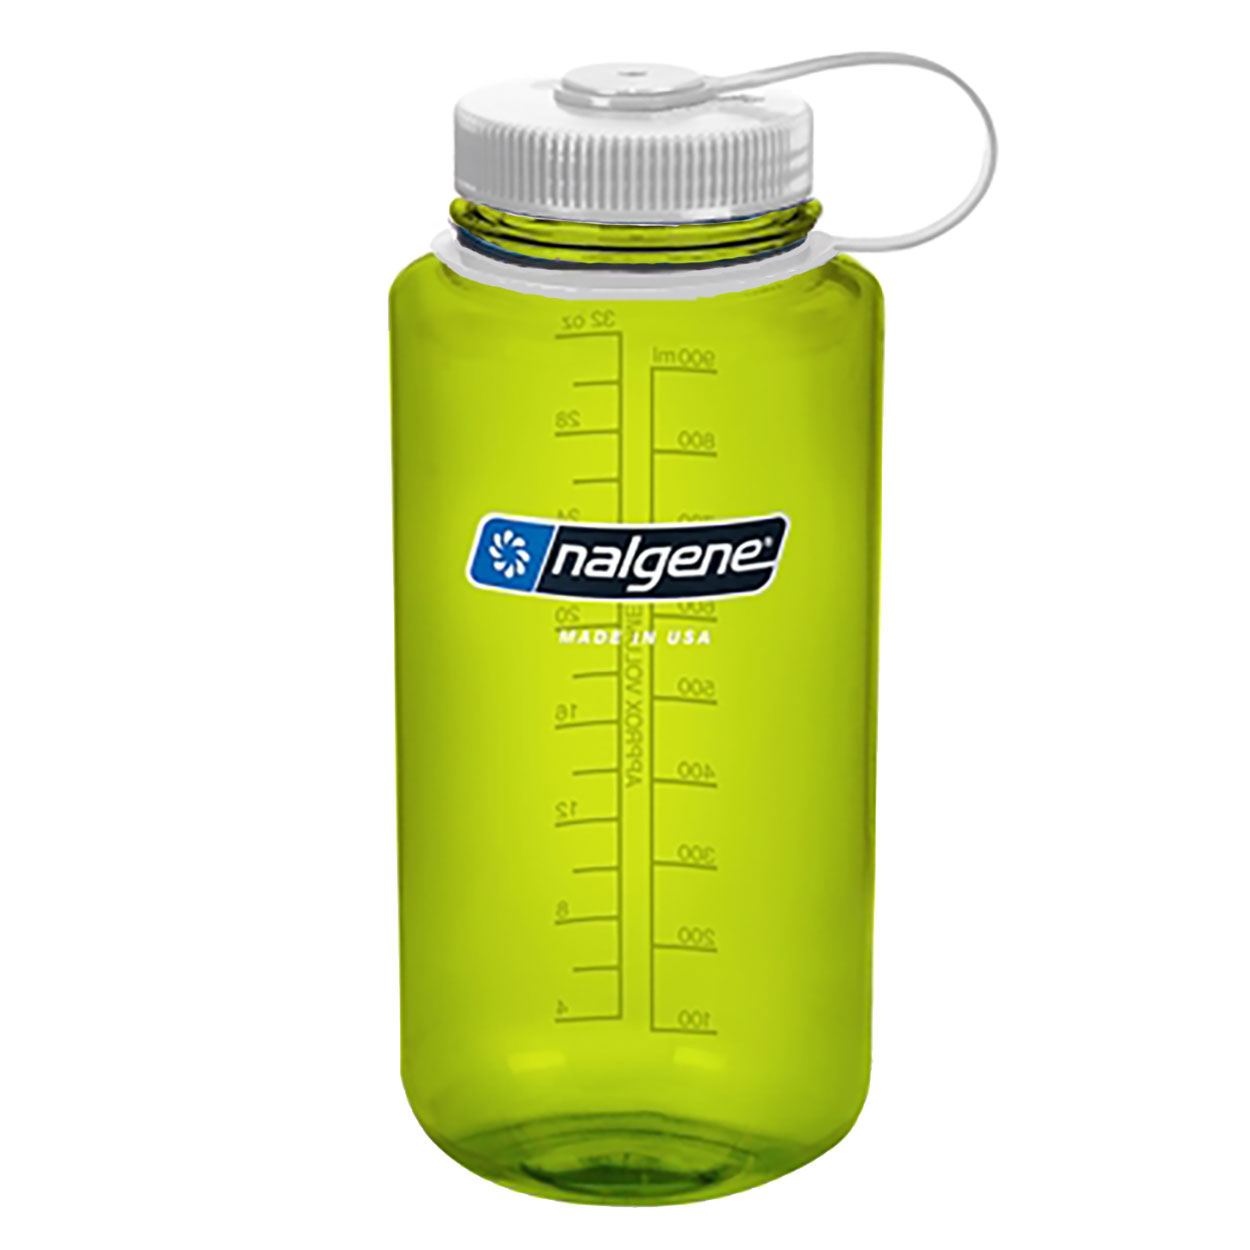 https://www.fuelforadventure.com/wp-content/uploads/2019/07/Nalgene_32oz_Wide_Mouth_Green_with_White_Lid__62473.jpg